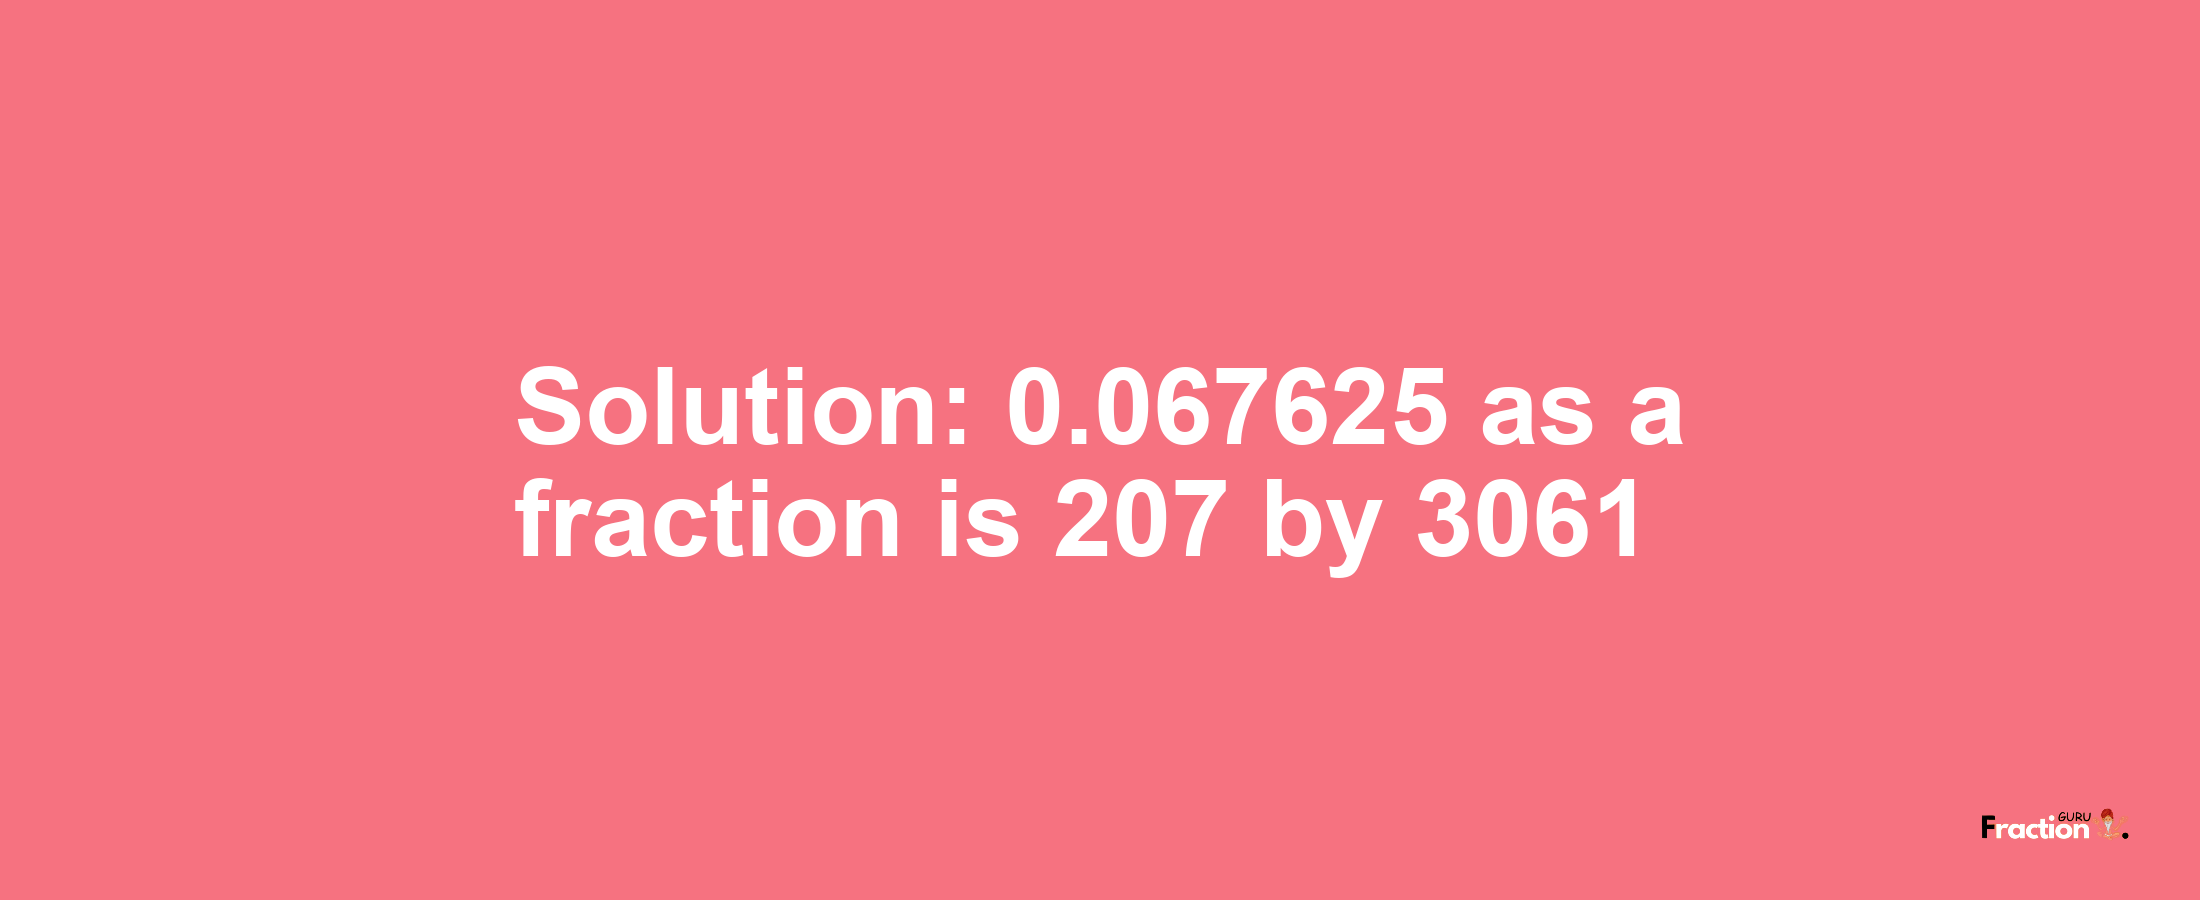 Solution:0.067625 as a fraction is 207/3061